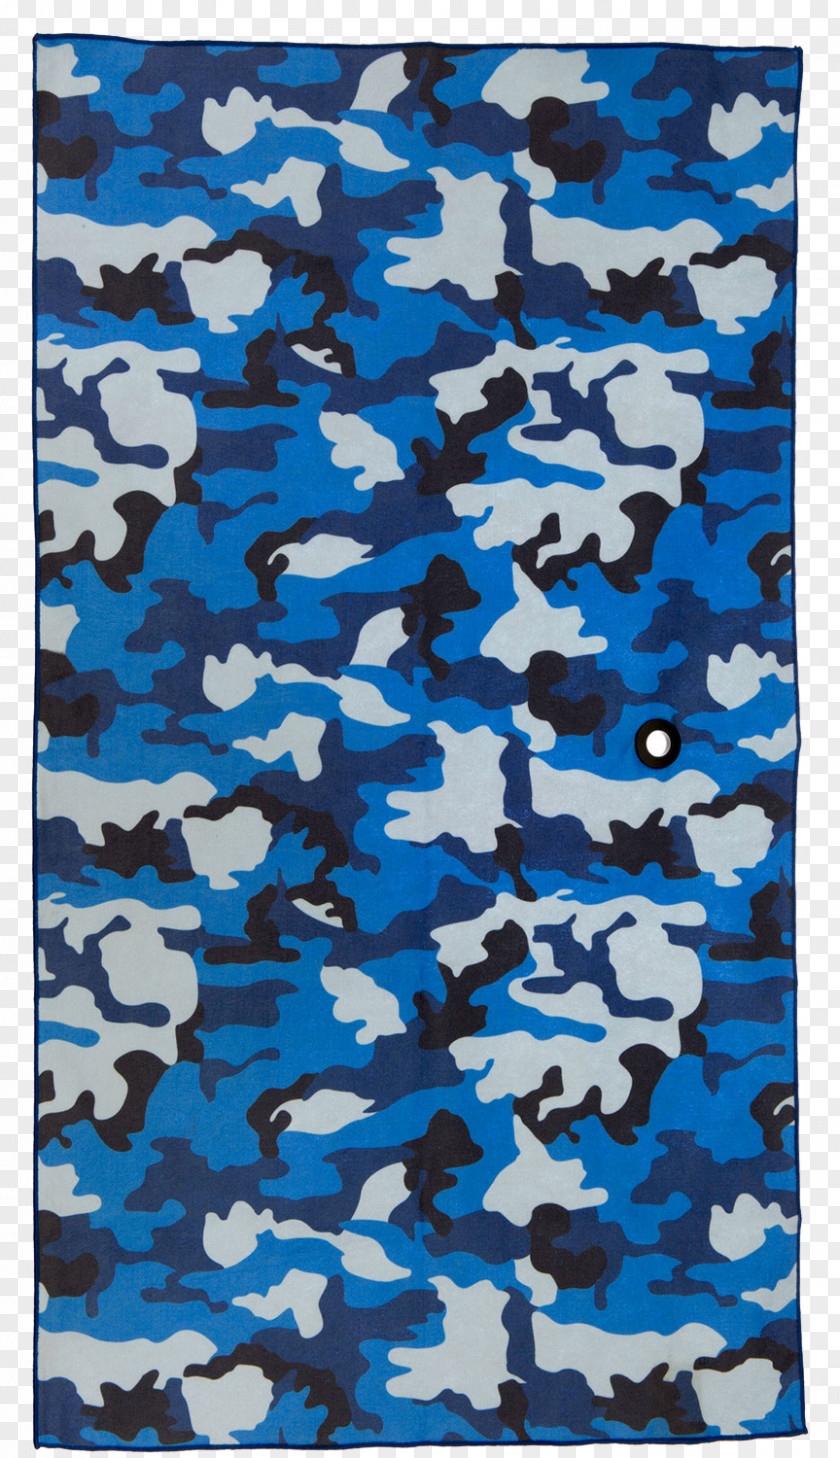 Blue Towel Military Camouflage Microfiber Textile PNG